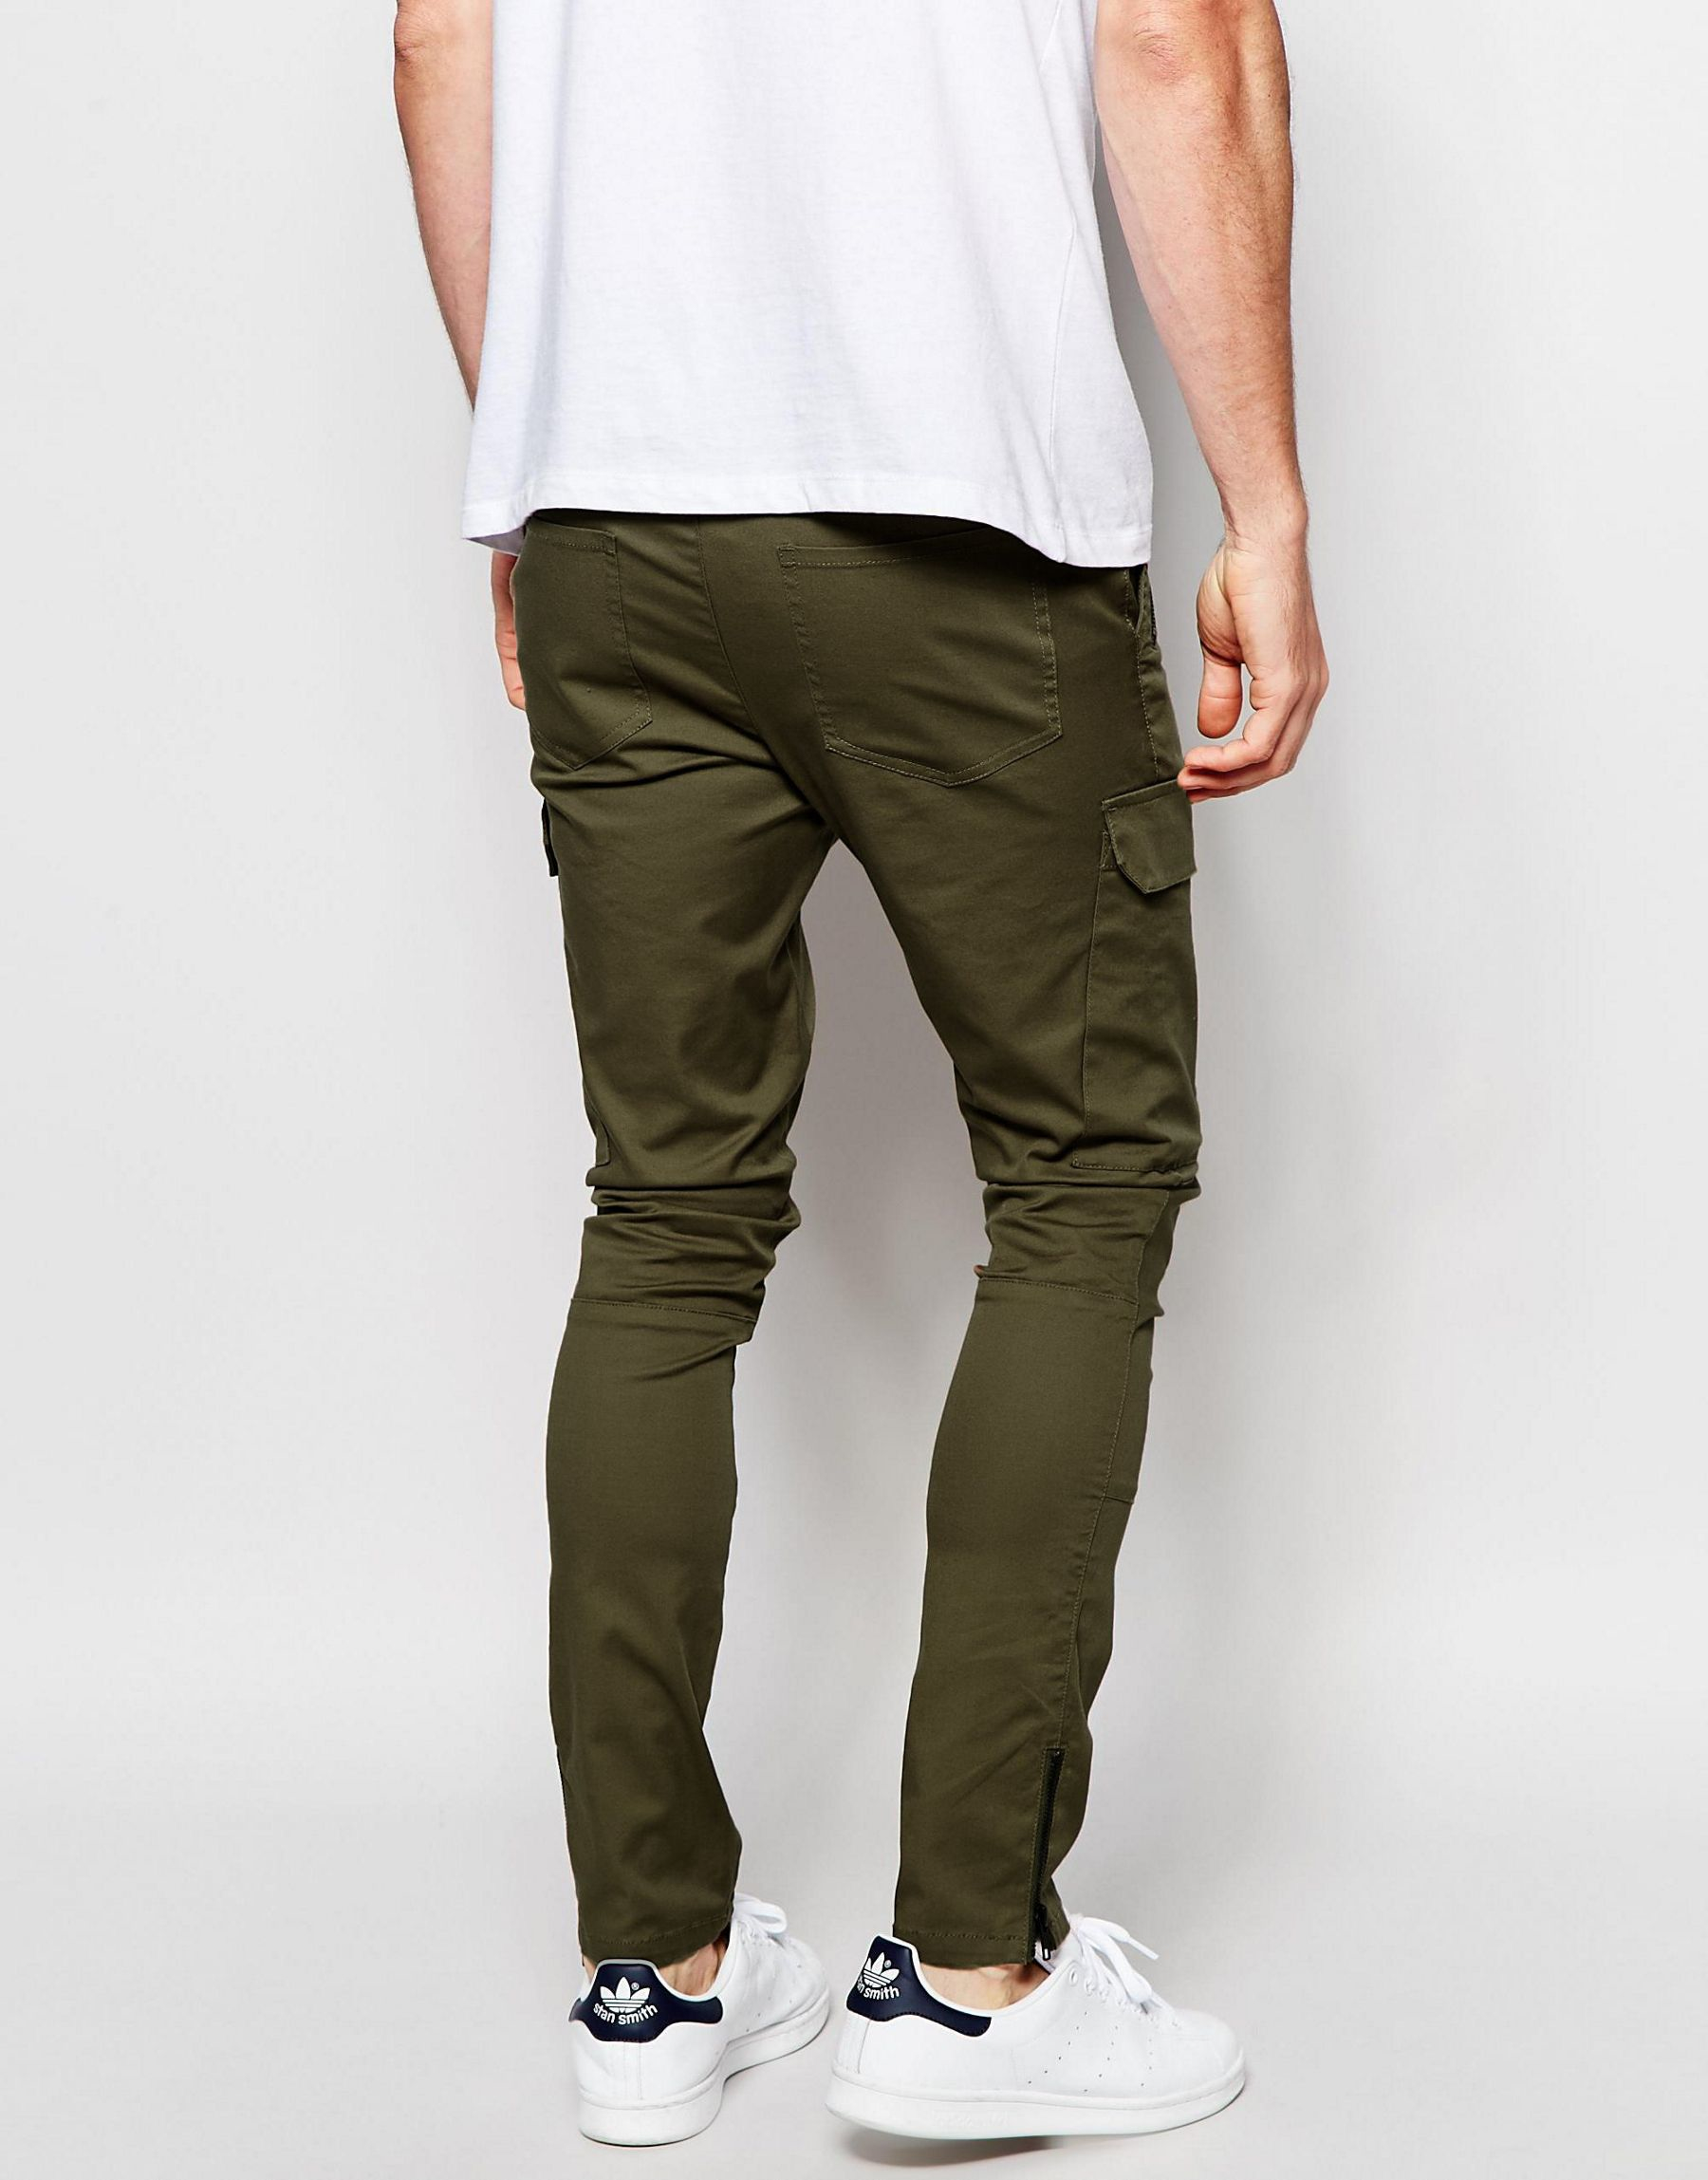 Lyst - Asos Super Skinny Trousers With Zip Cargo Pockets In Khaki in ...